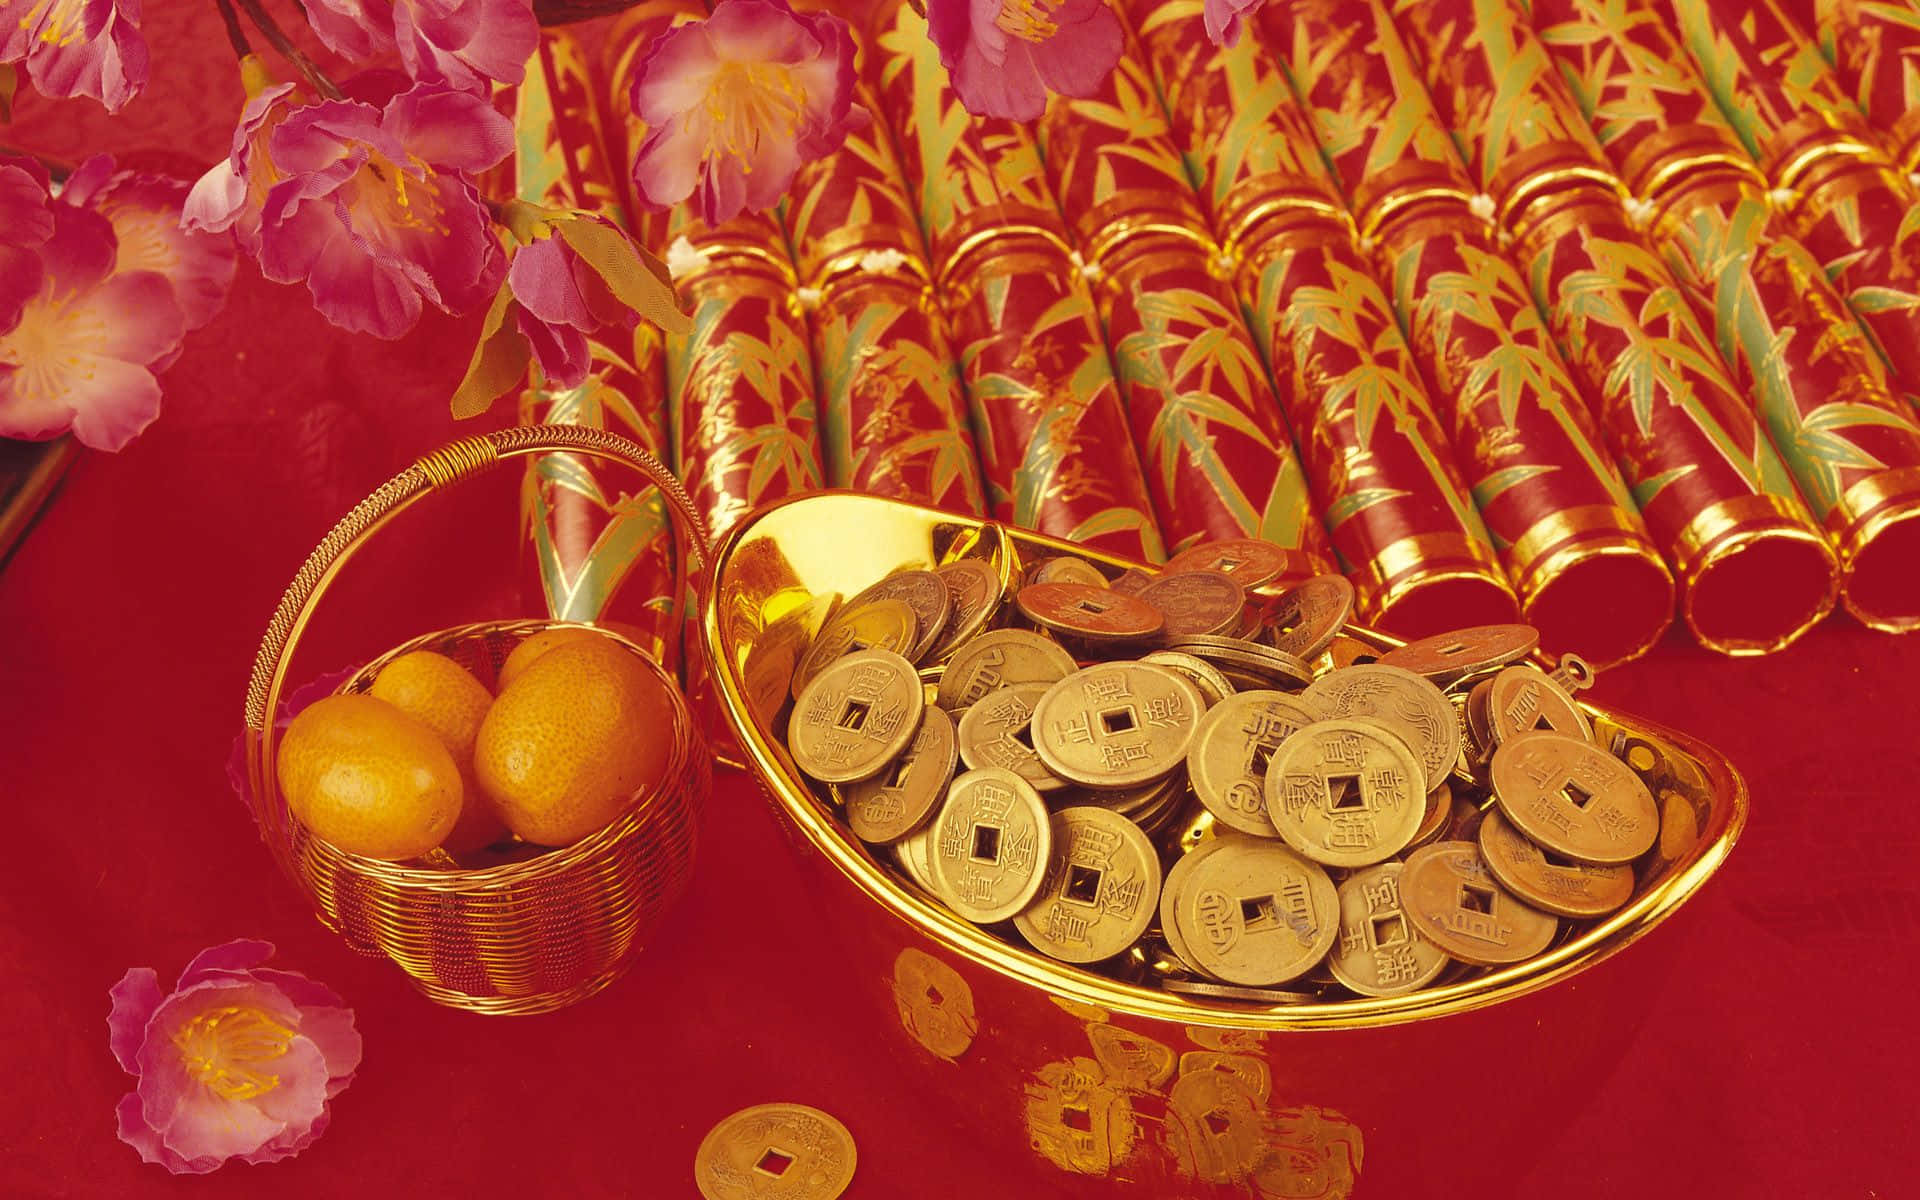 Celebrate the Chinese New Year with a vibrant background of festive decorations